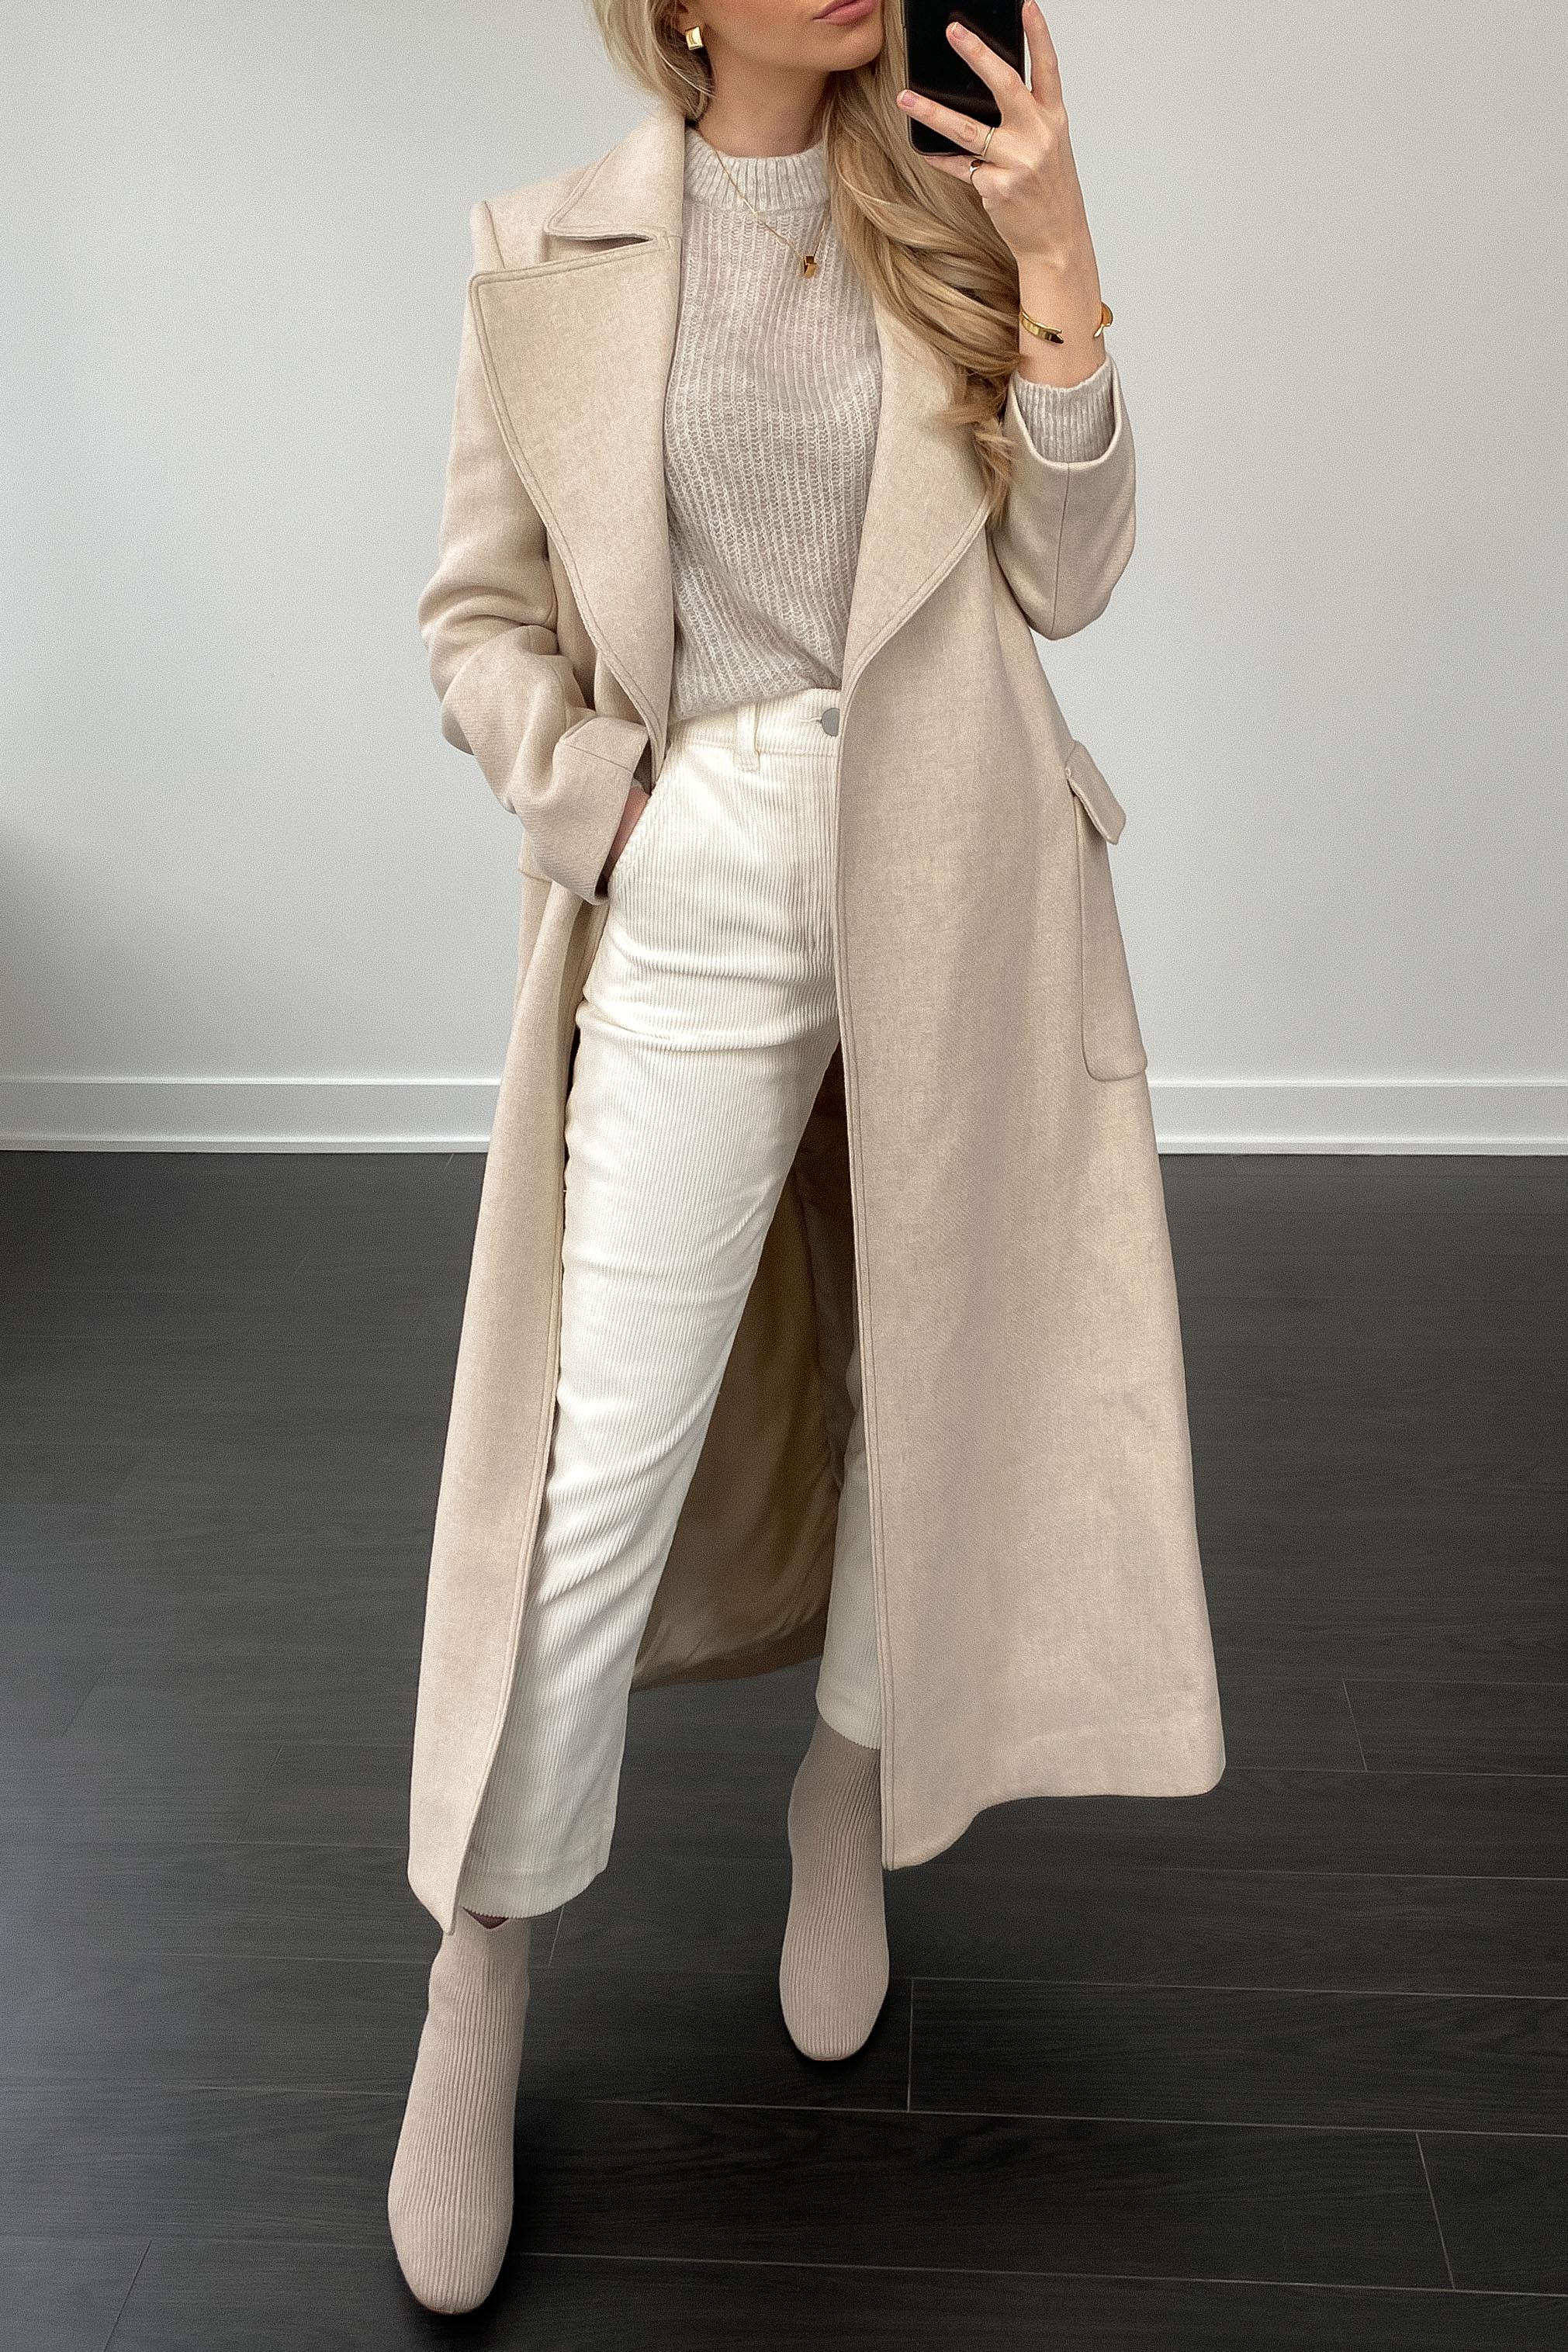 15 Stylish Winter Date Outfits For 2020-2021 - Styleoholic